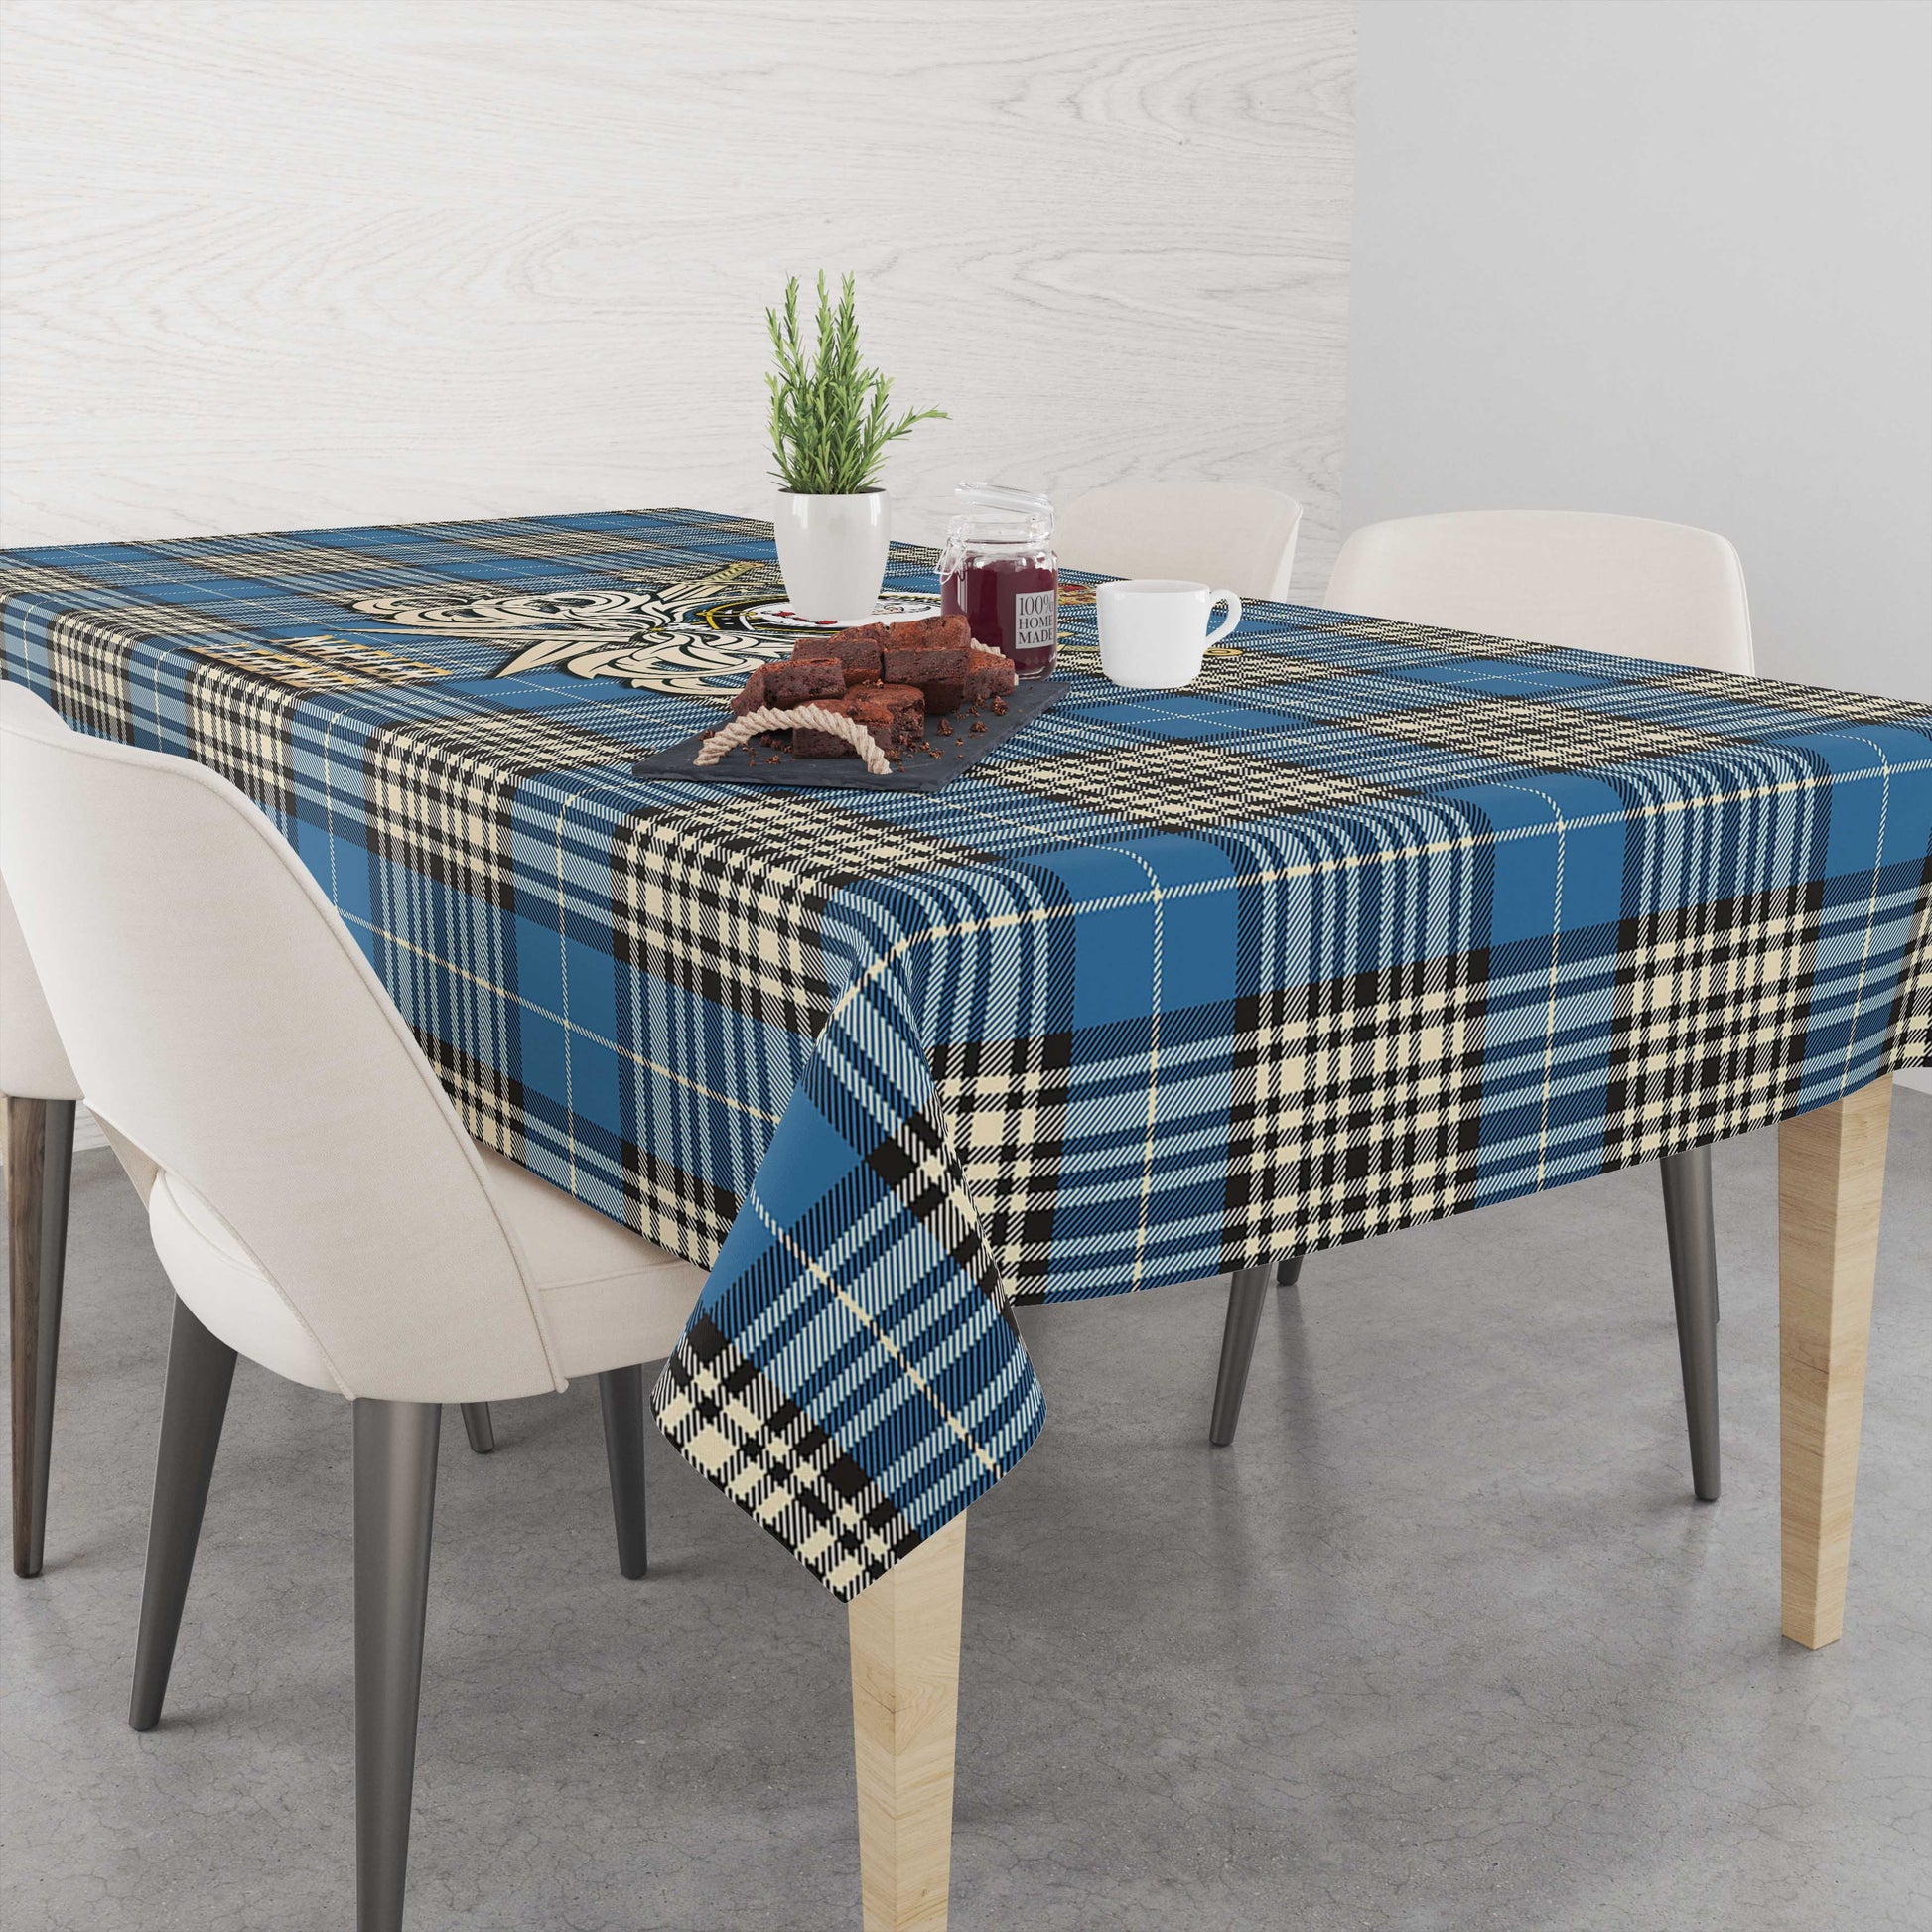 Tartan Vibes Clothing Napier Ancient Tartan Tablecloth with Clan Crest and the Golden Sword of Courageous Legacy